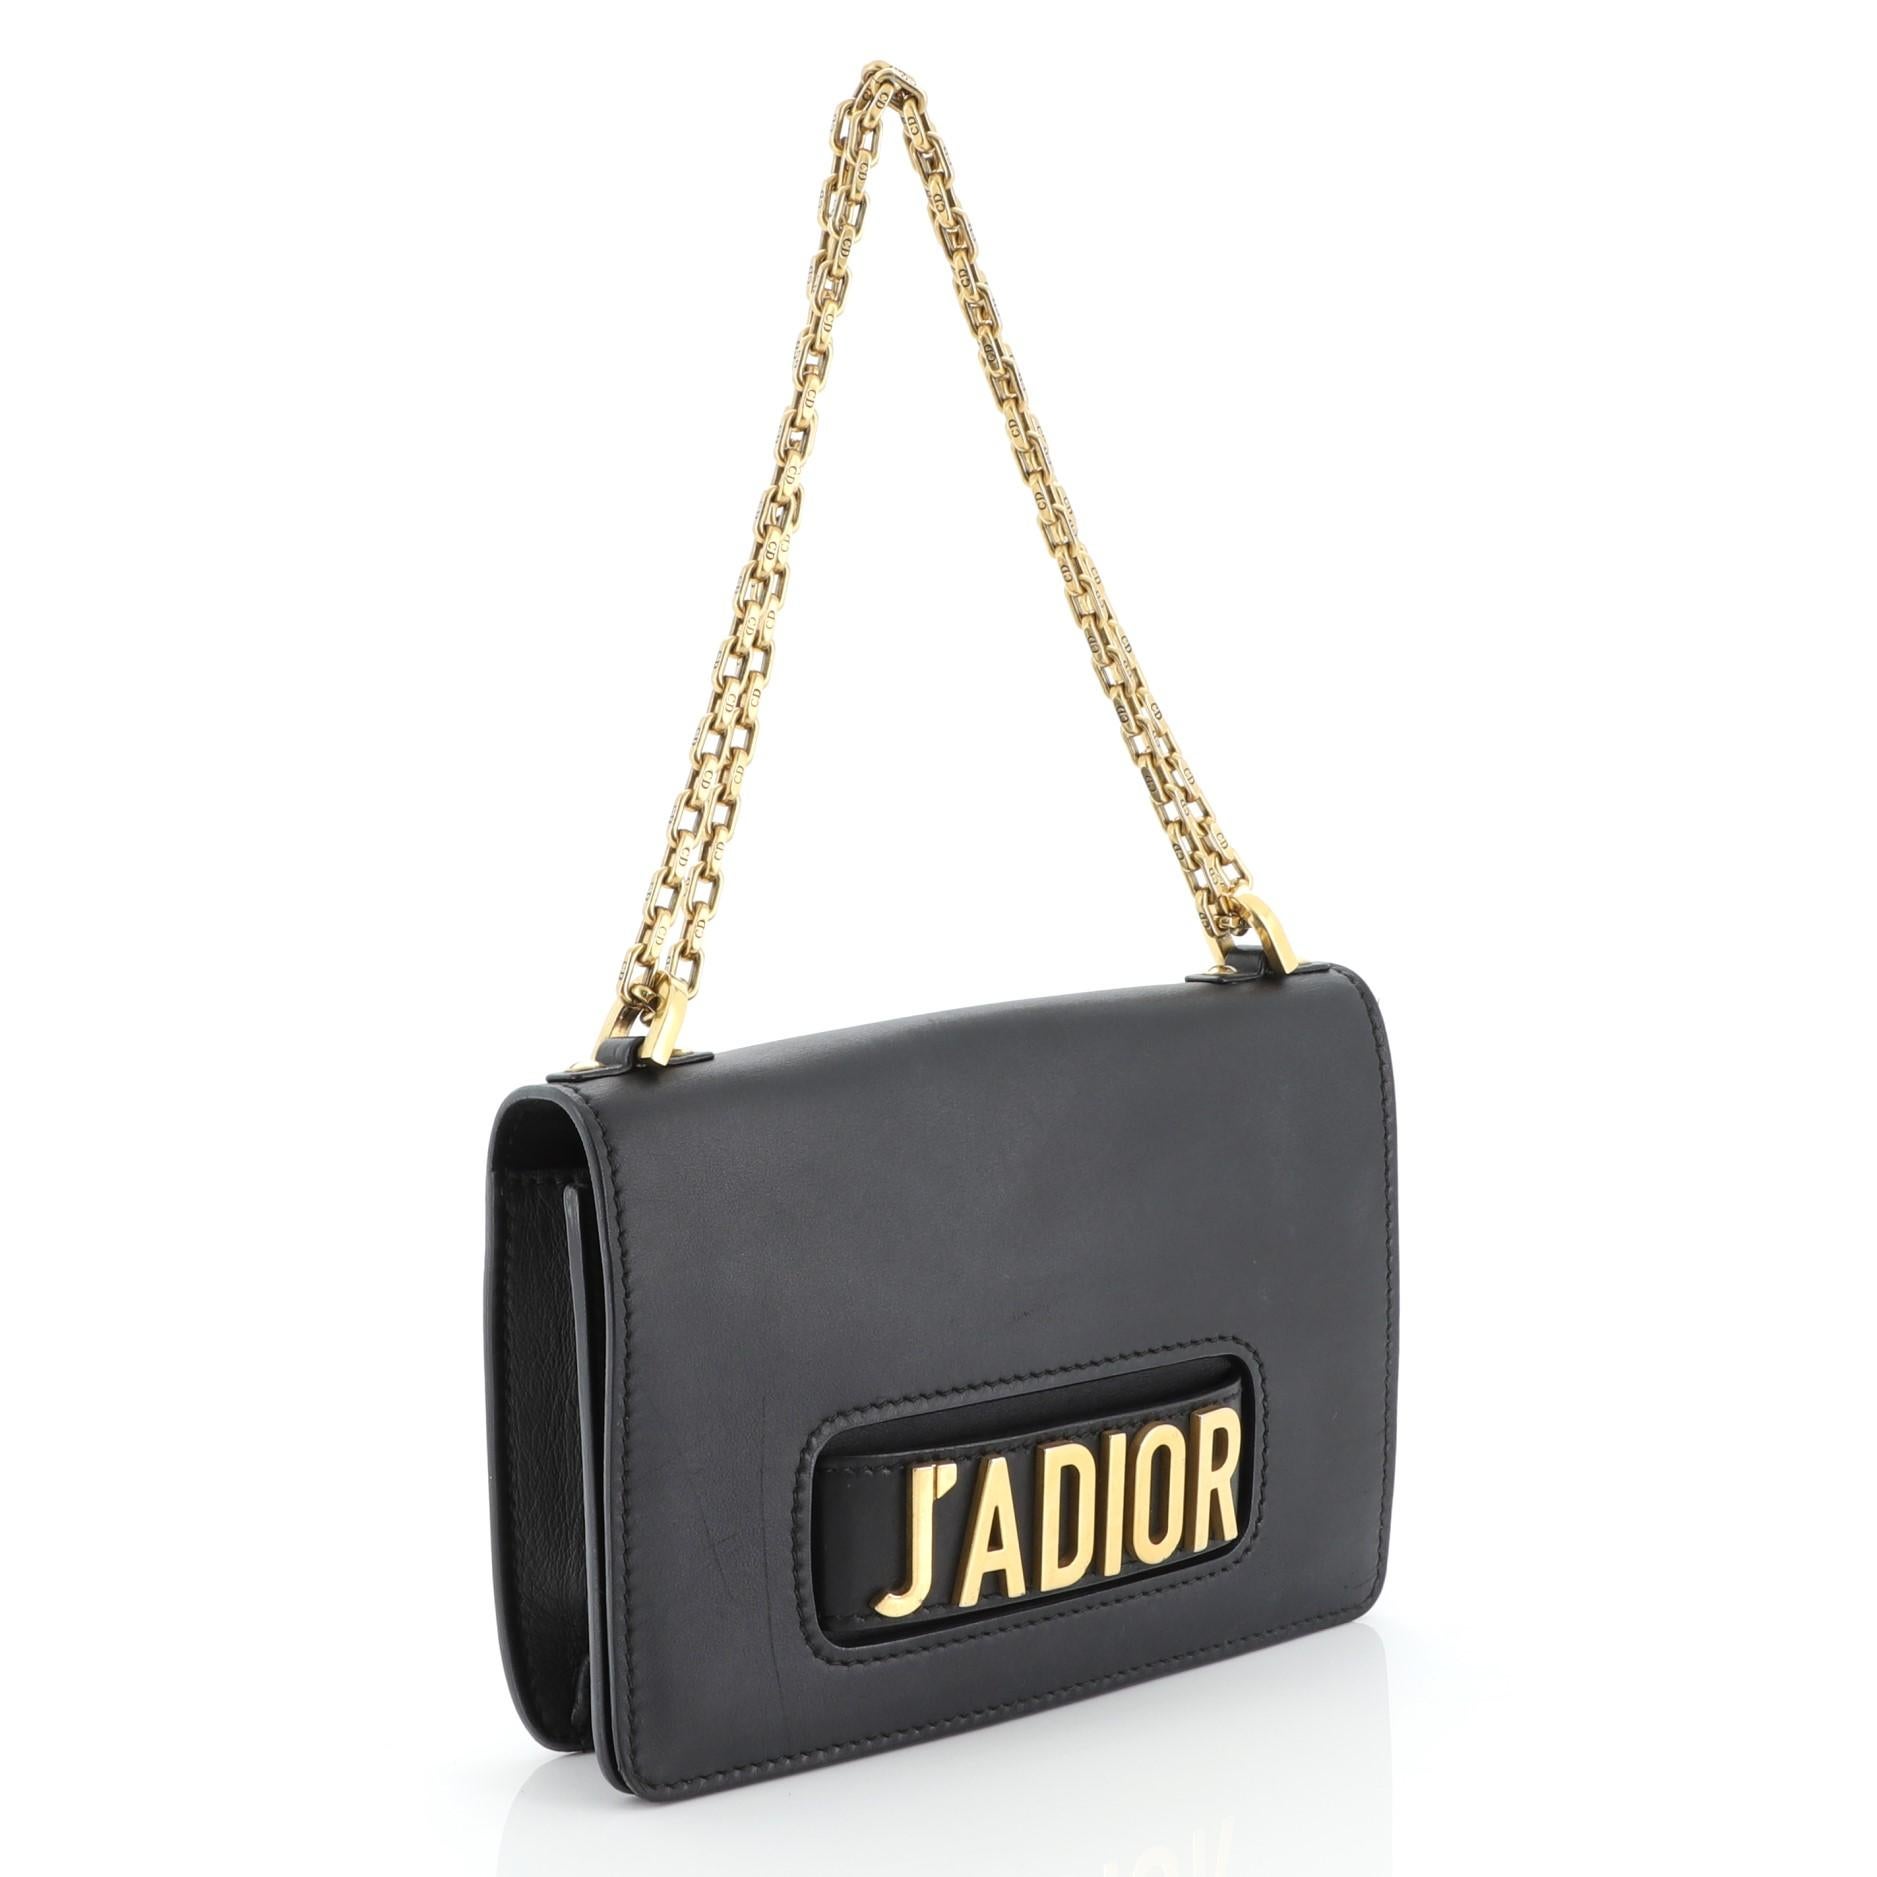 This Christian Dior J'adior Flap Bag Calfskin Medium, crafted in black leather, features a slot handclasp with metal plated J'ADIOR signature, chain link strap, full front flap and gold-tone hardware. It opens to a black suede interior with flap and